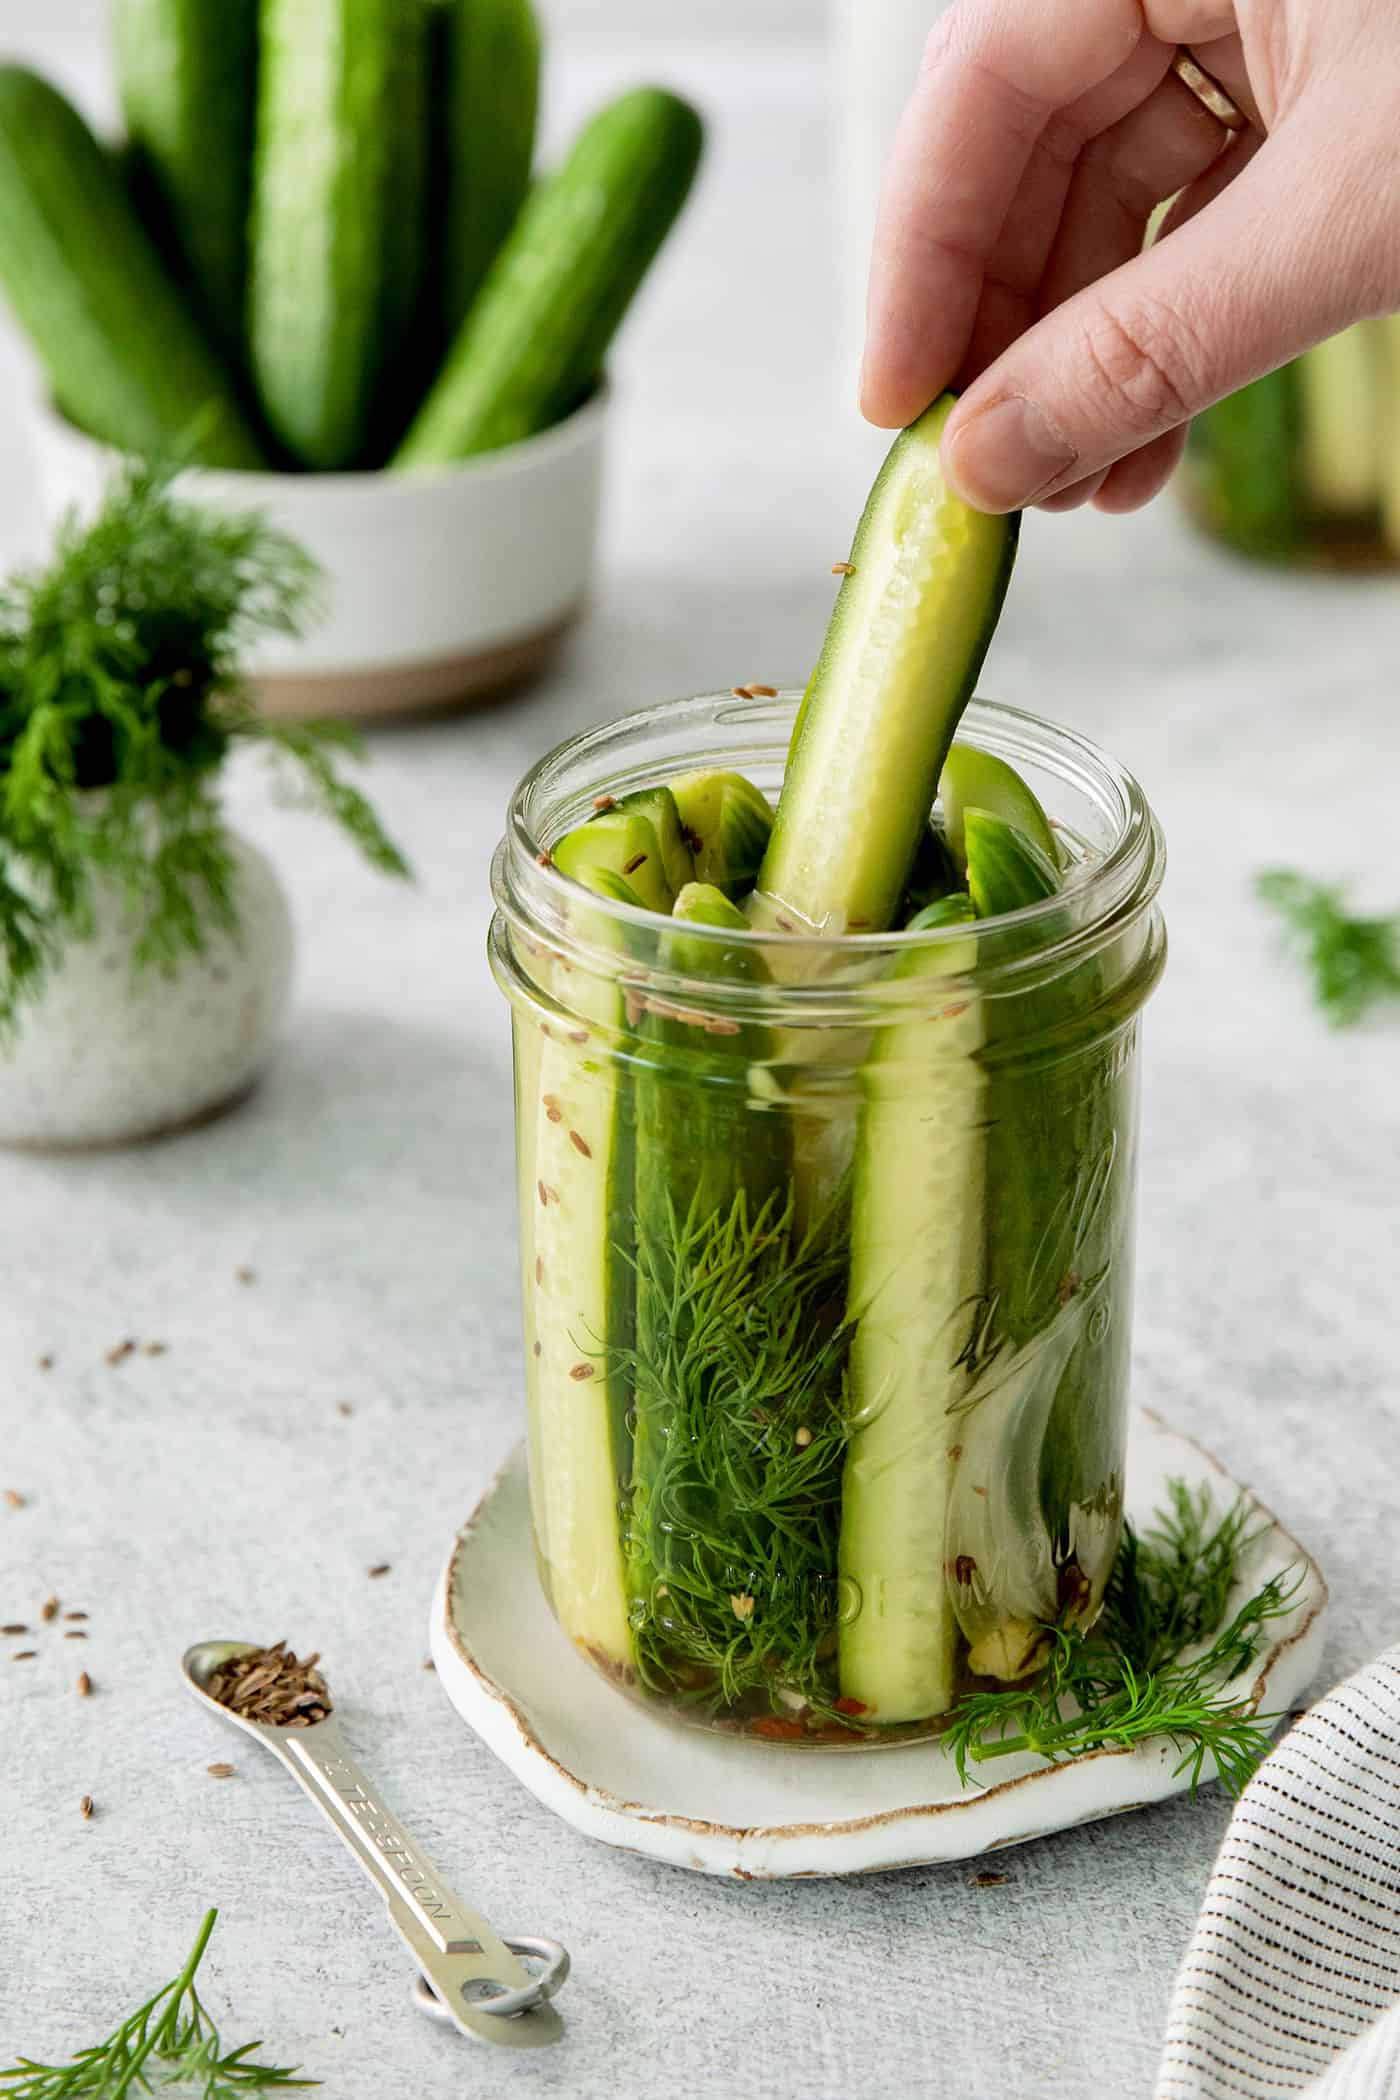 A hand pulling a dill pickle spear from a jar